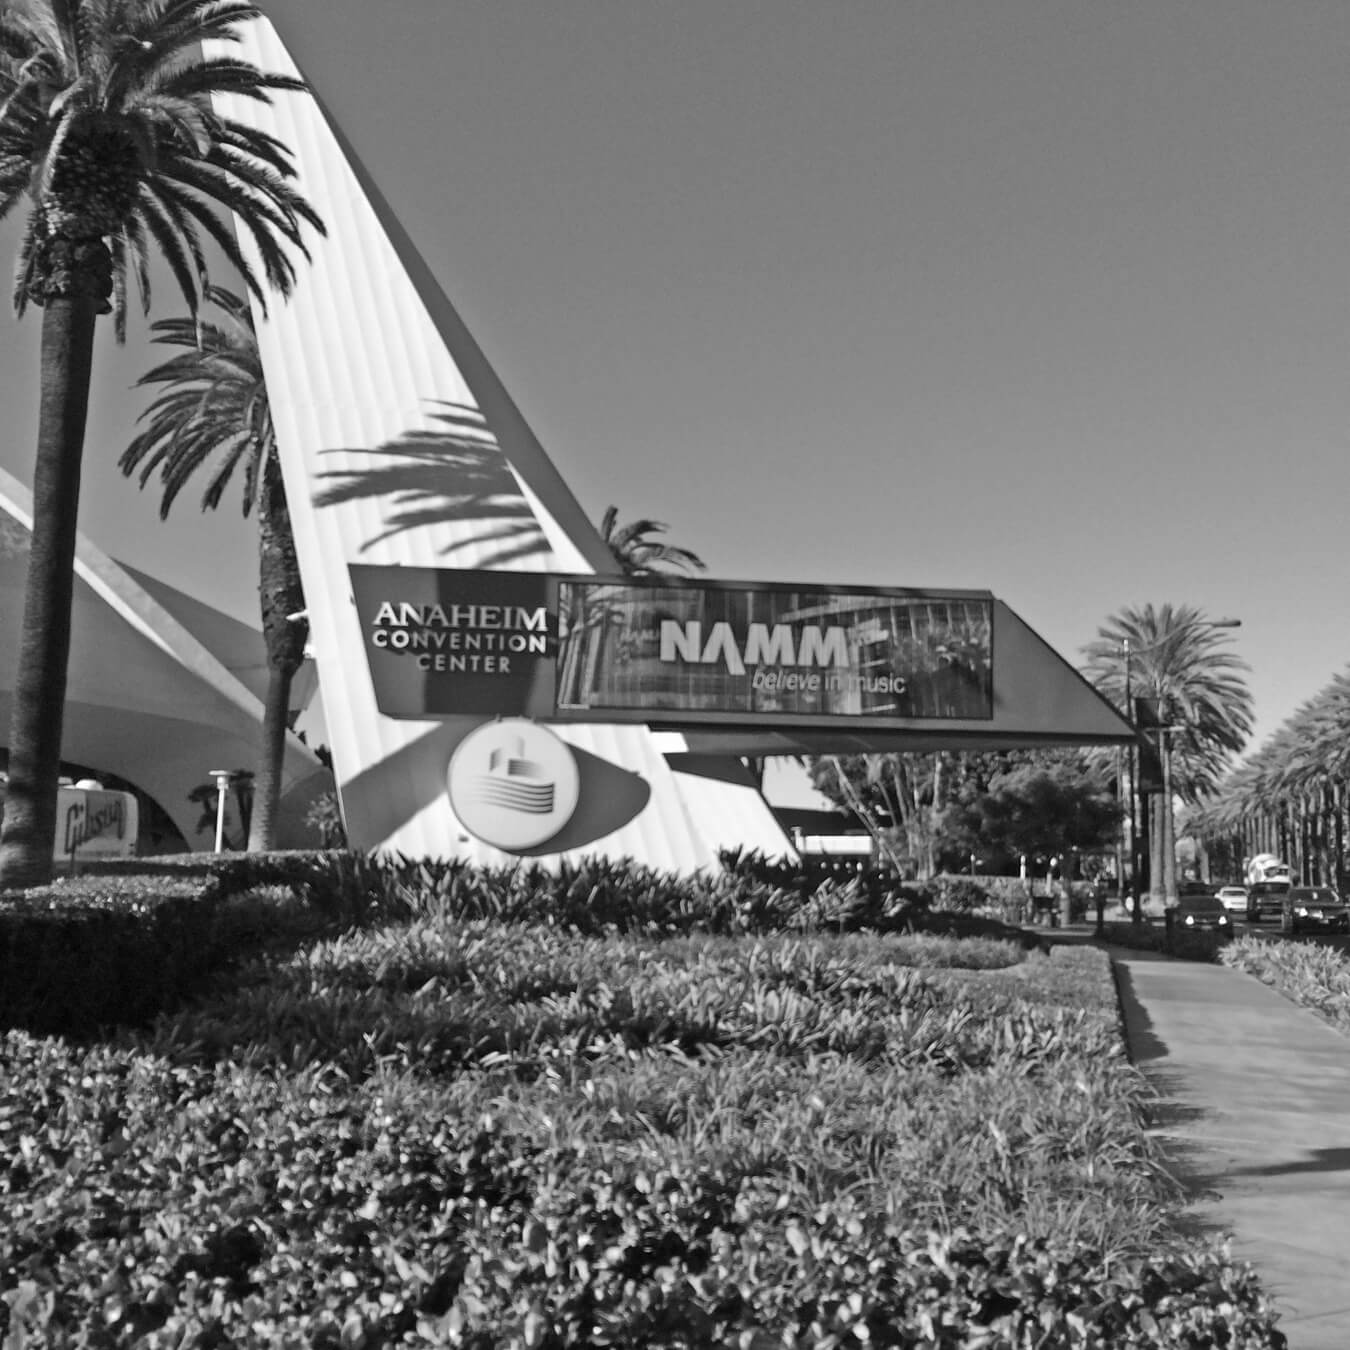 Musicians Invited to Experience NAMM’s Music Industry Day, July 11